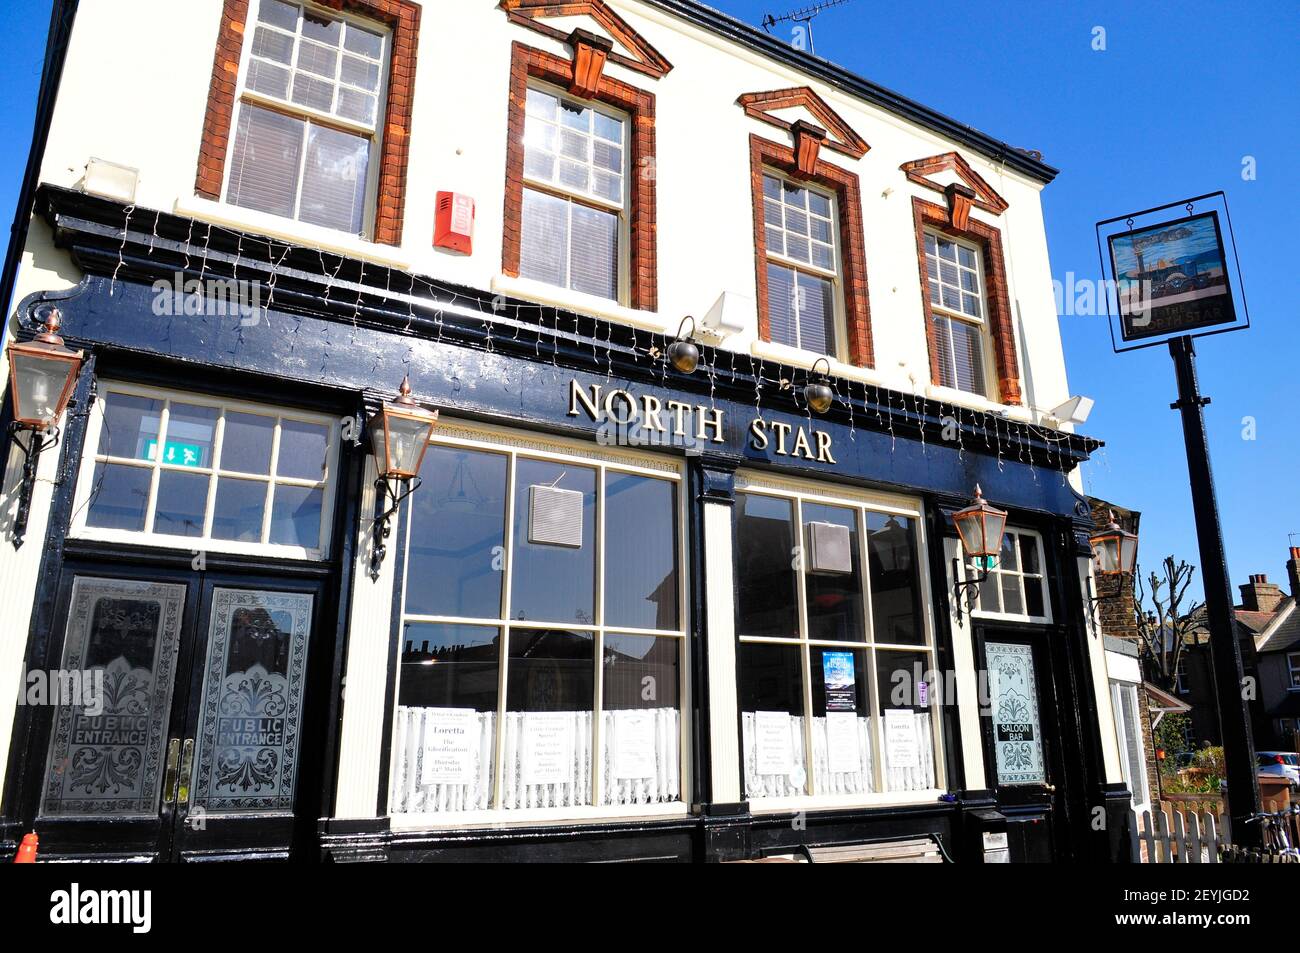 The North Star pub in Leytonstone, London, England Stock Photo